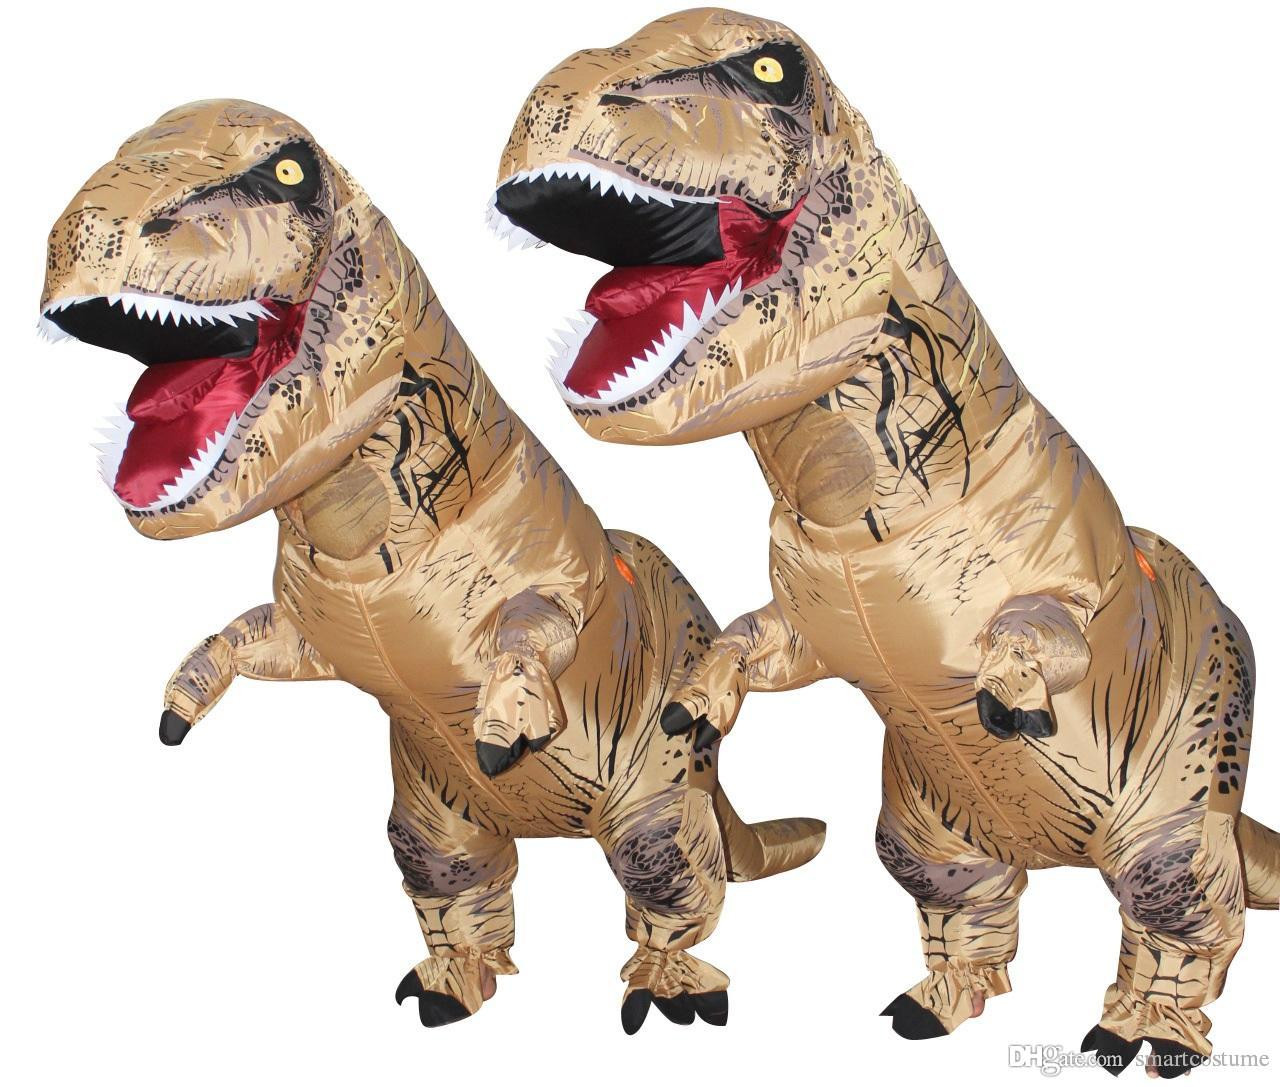 DIY Dinosaur Costumes For Adults
 Fancy Dress Mascot Giant Inflatable Dinosaur Suit For